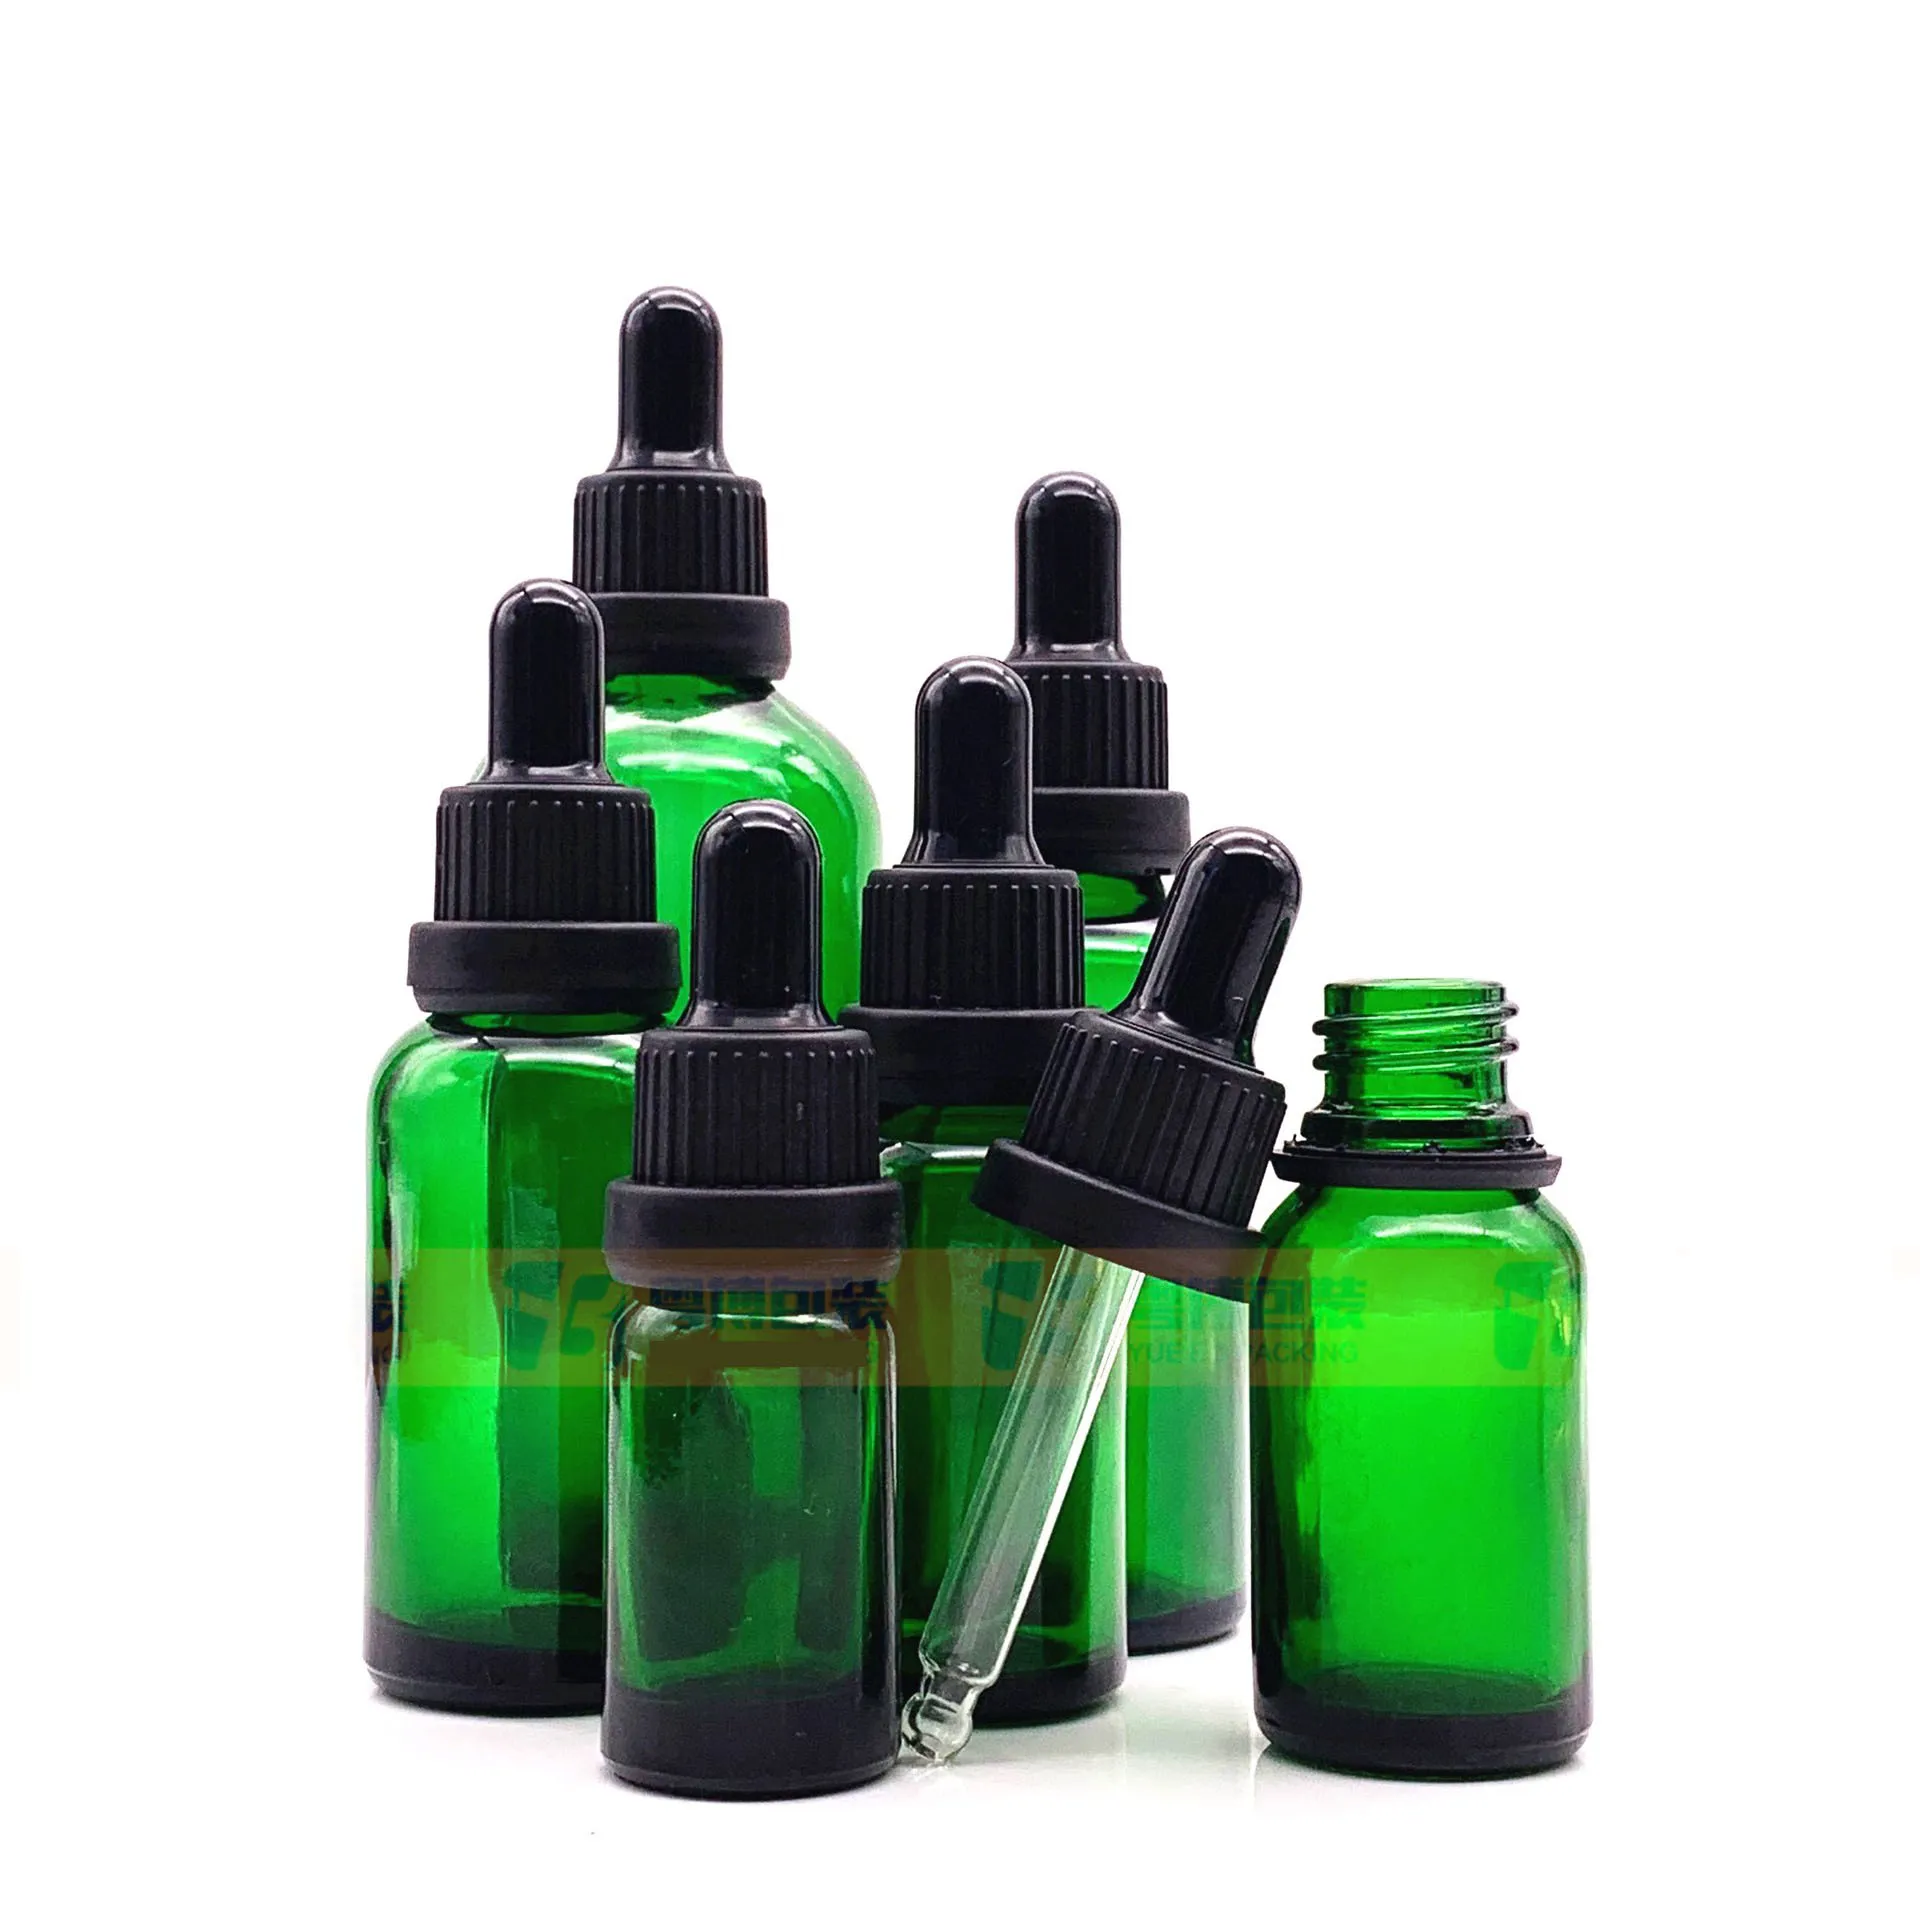 5 10 15ml Green Glass Bottles, With Glass Eye Droppers Pipette 20 30 50 100ML Essential Oil Bottle for For Essential Oils Colognes & Perfume